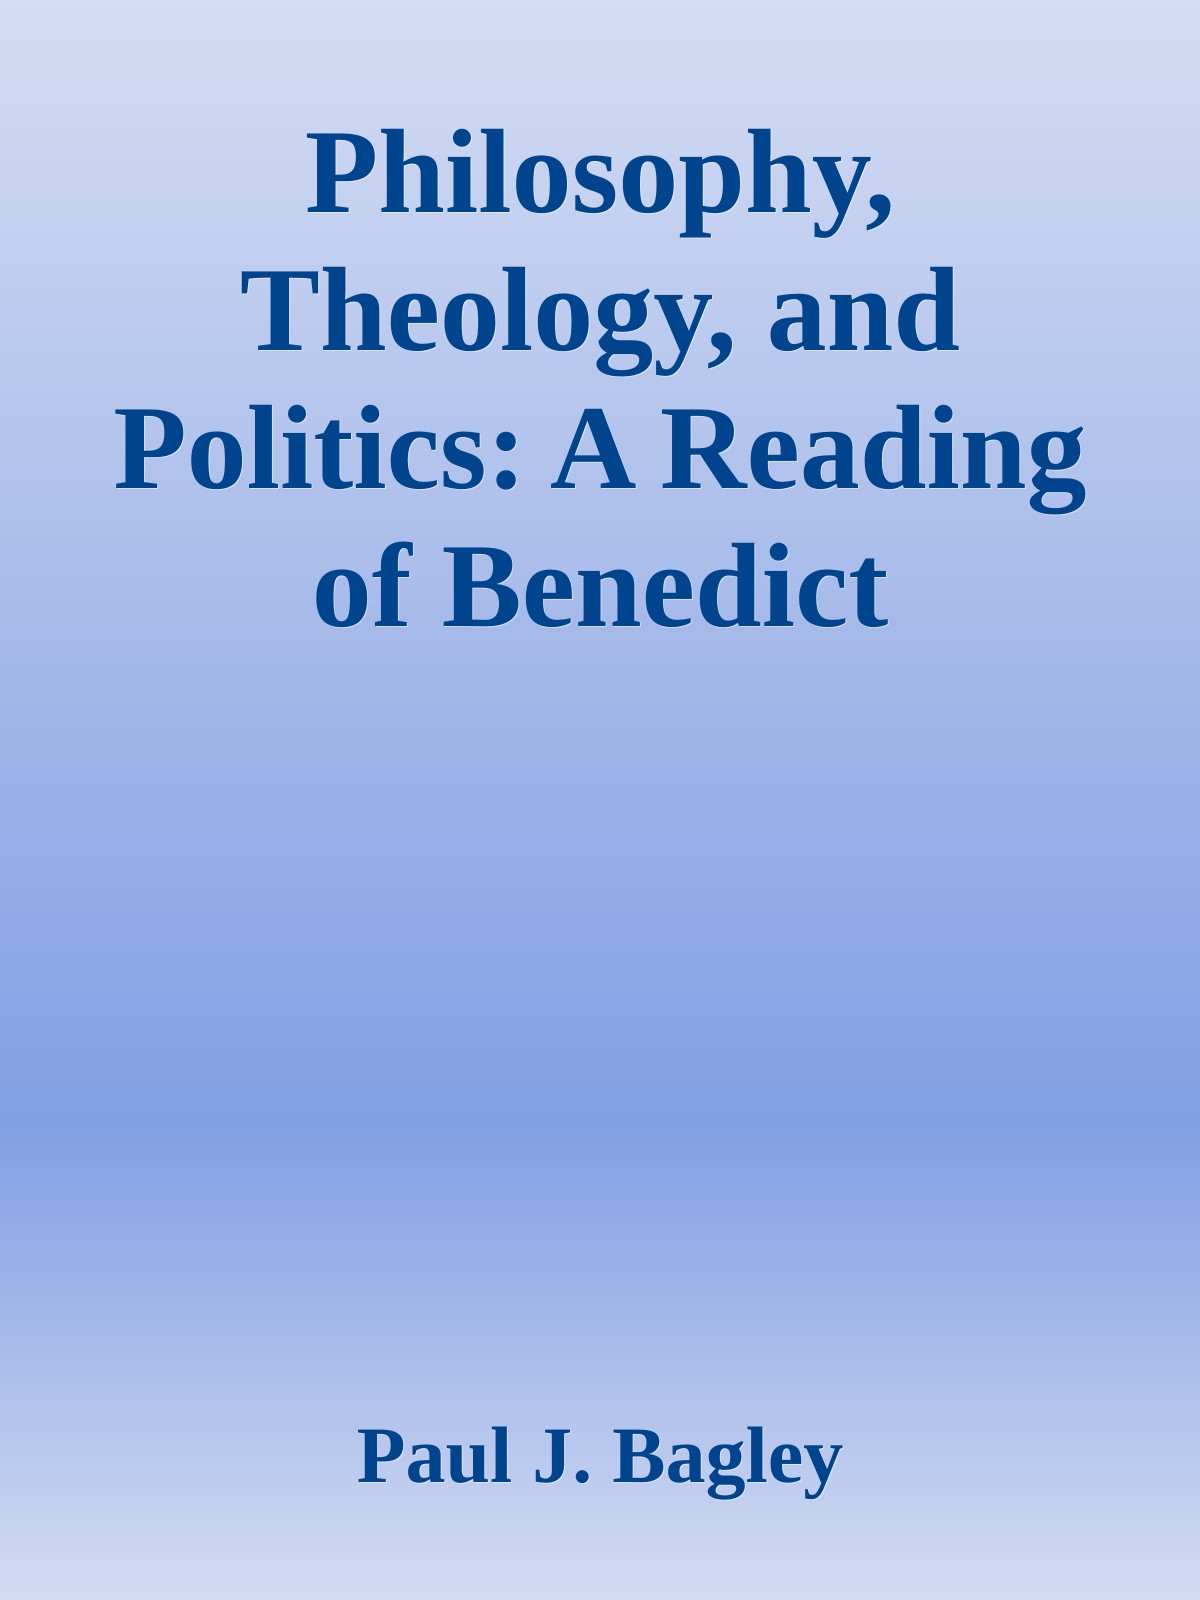 Philosophy, Theology, and Politics: A Reading of Benedict Spinoza's Tractatus Theologico-Politicus